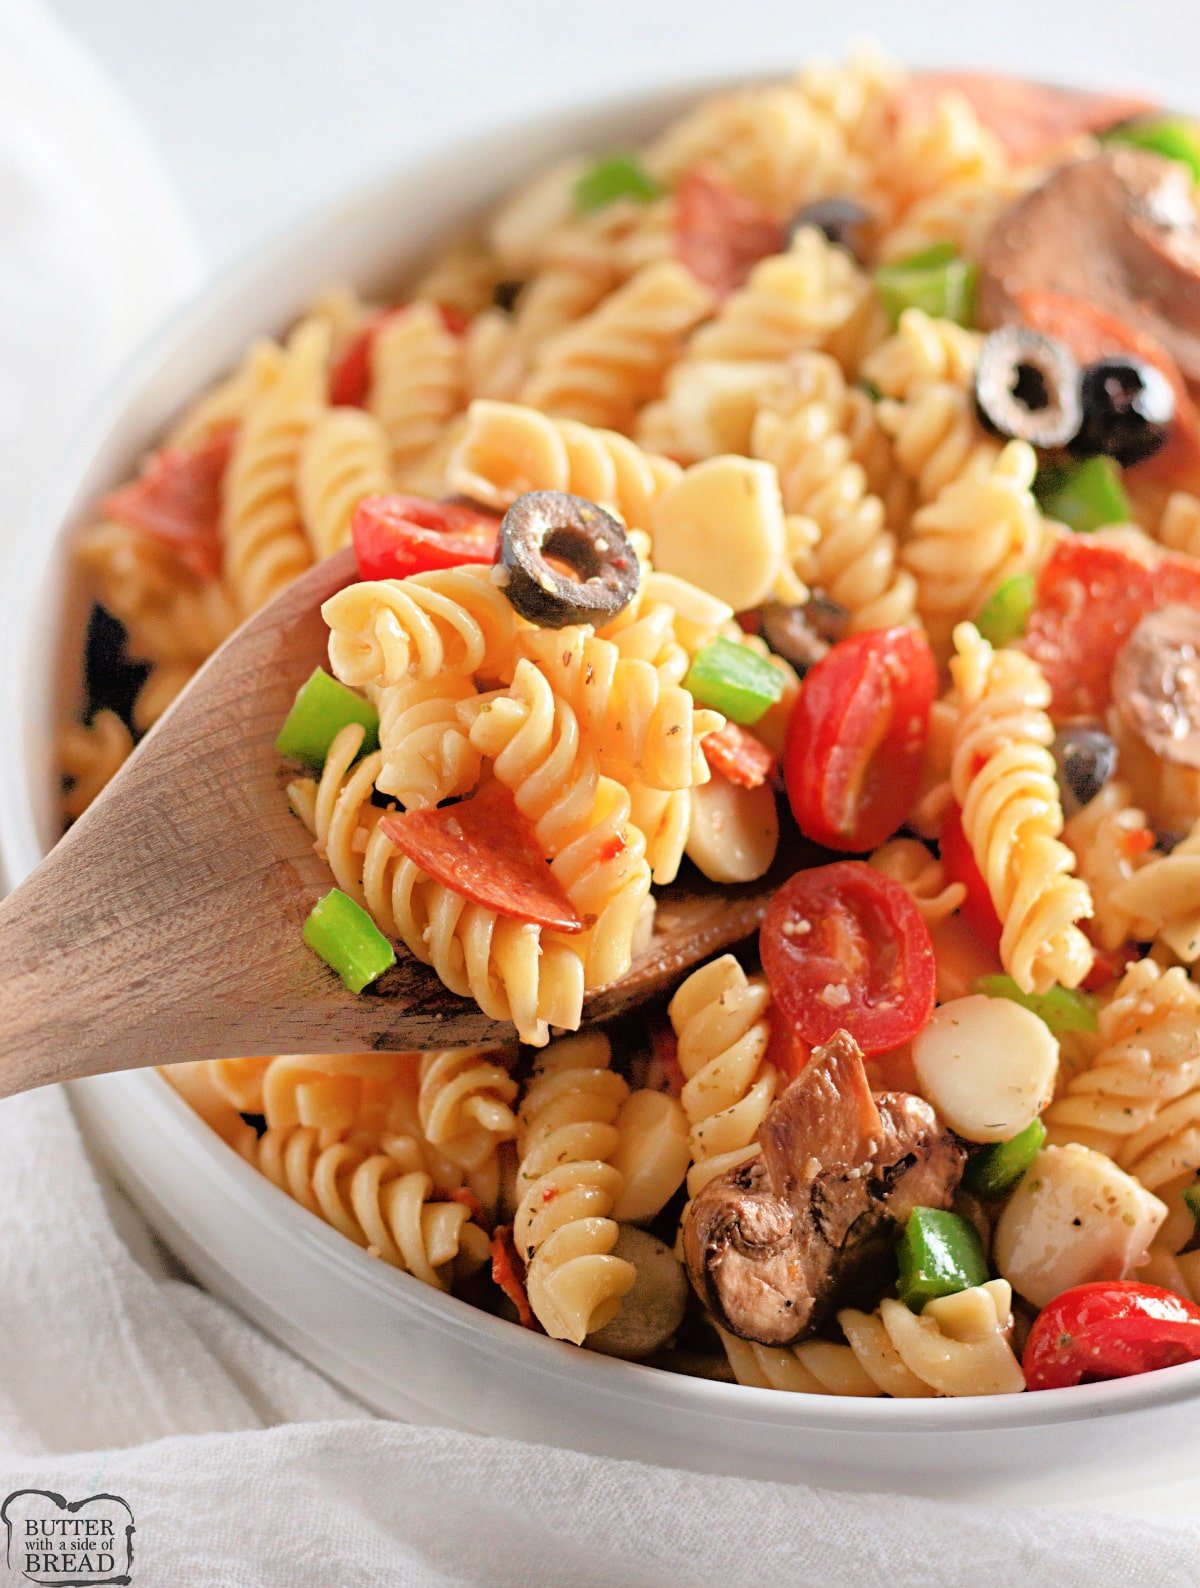 Cold pasta salad recipe with pepperoni, mozzarella, olives and other pizza toppings